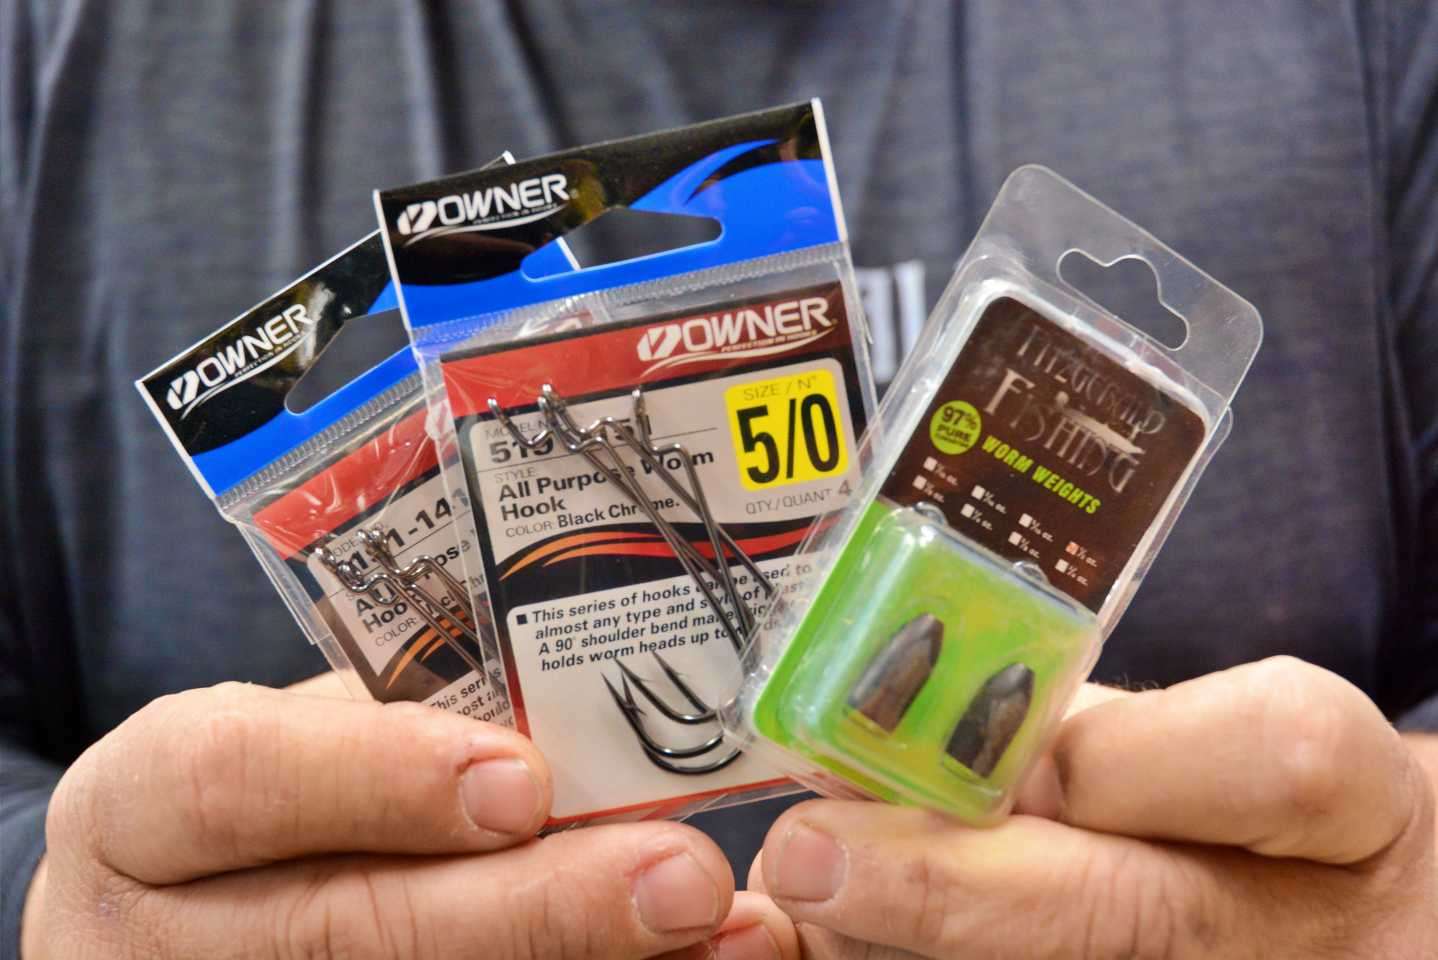 Gross prefers the all-around versatility of Owner All Purpose Worm Hooks, these in the 5/0 size. He pairs those up with 1/2-ounce Fitzgerald Fishing Tungsten Weights.  